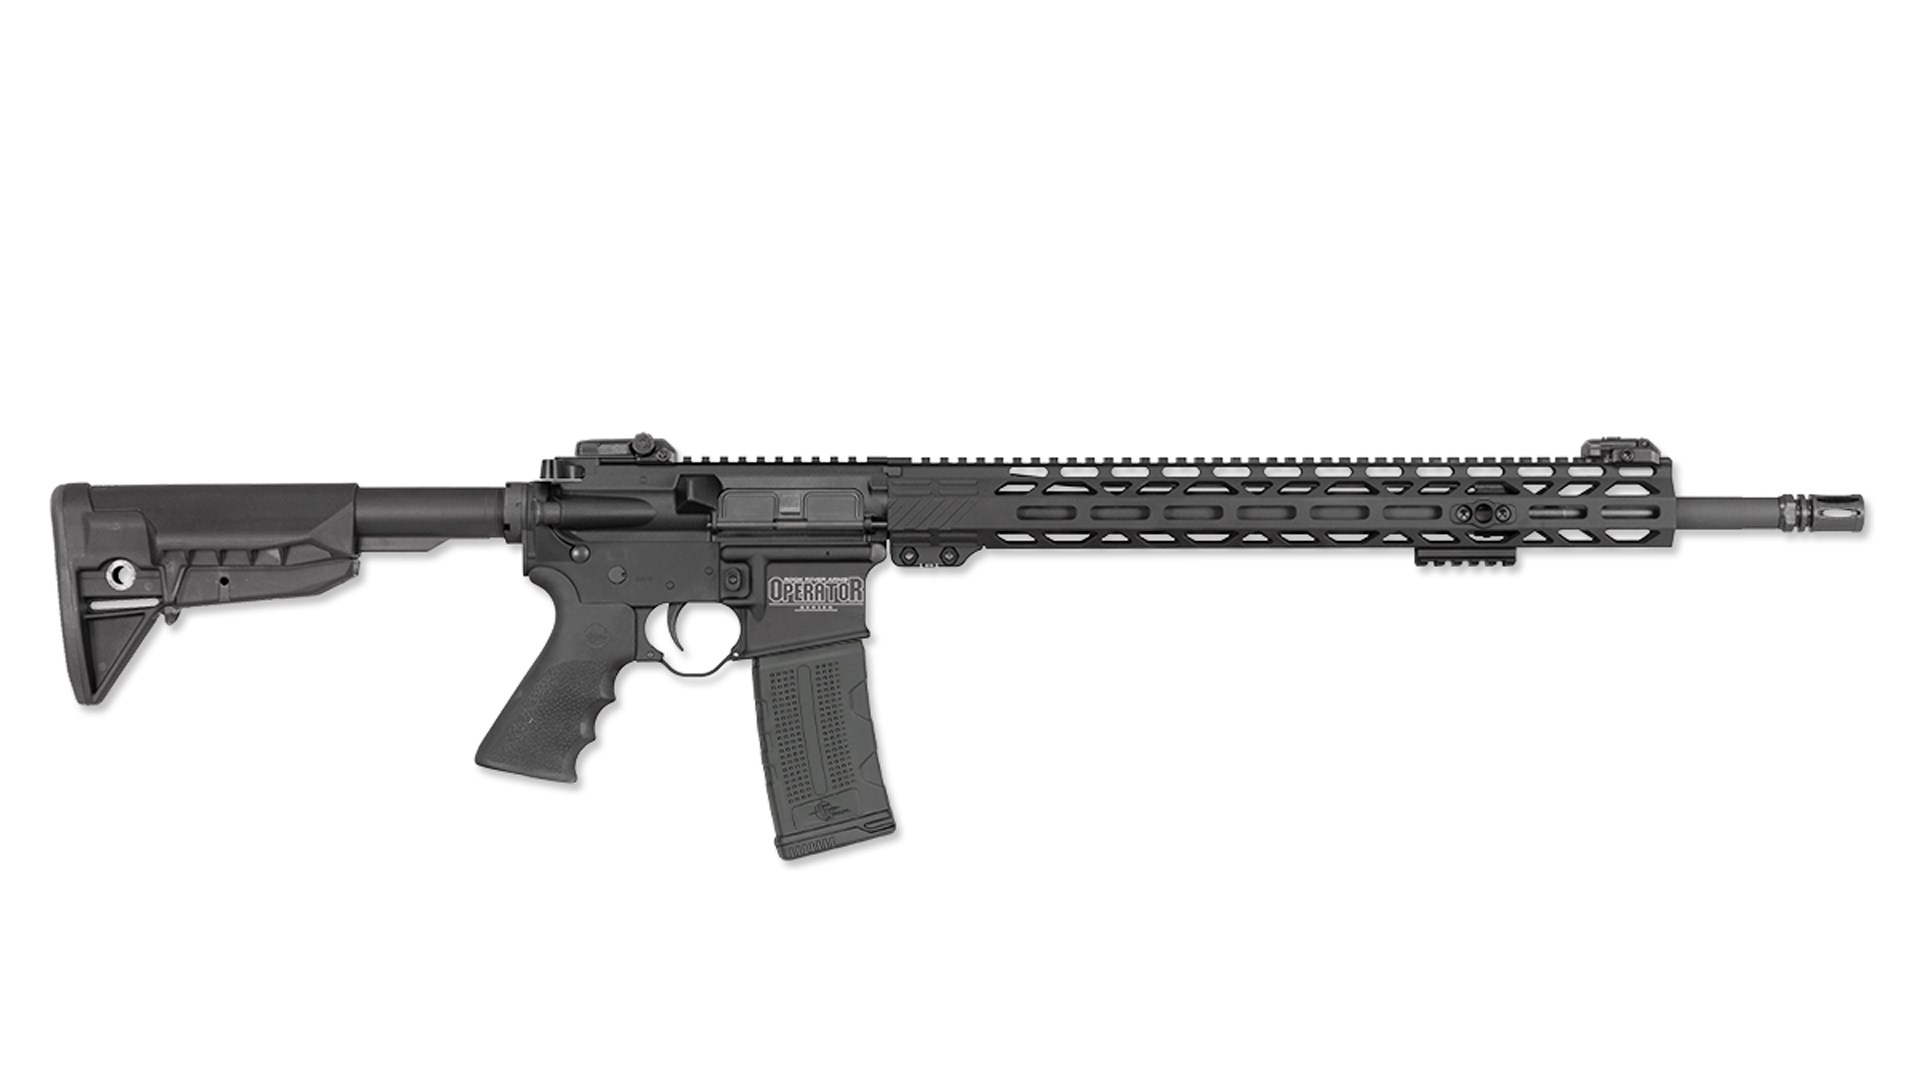 A longer-barreled DMR Operator from Rock River Arms chambered in 5.56 NATO.